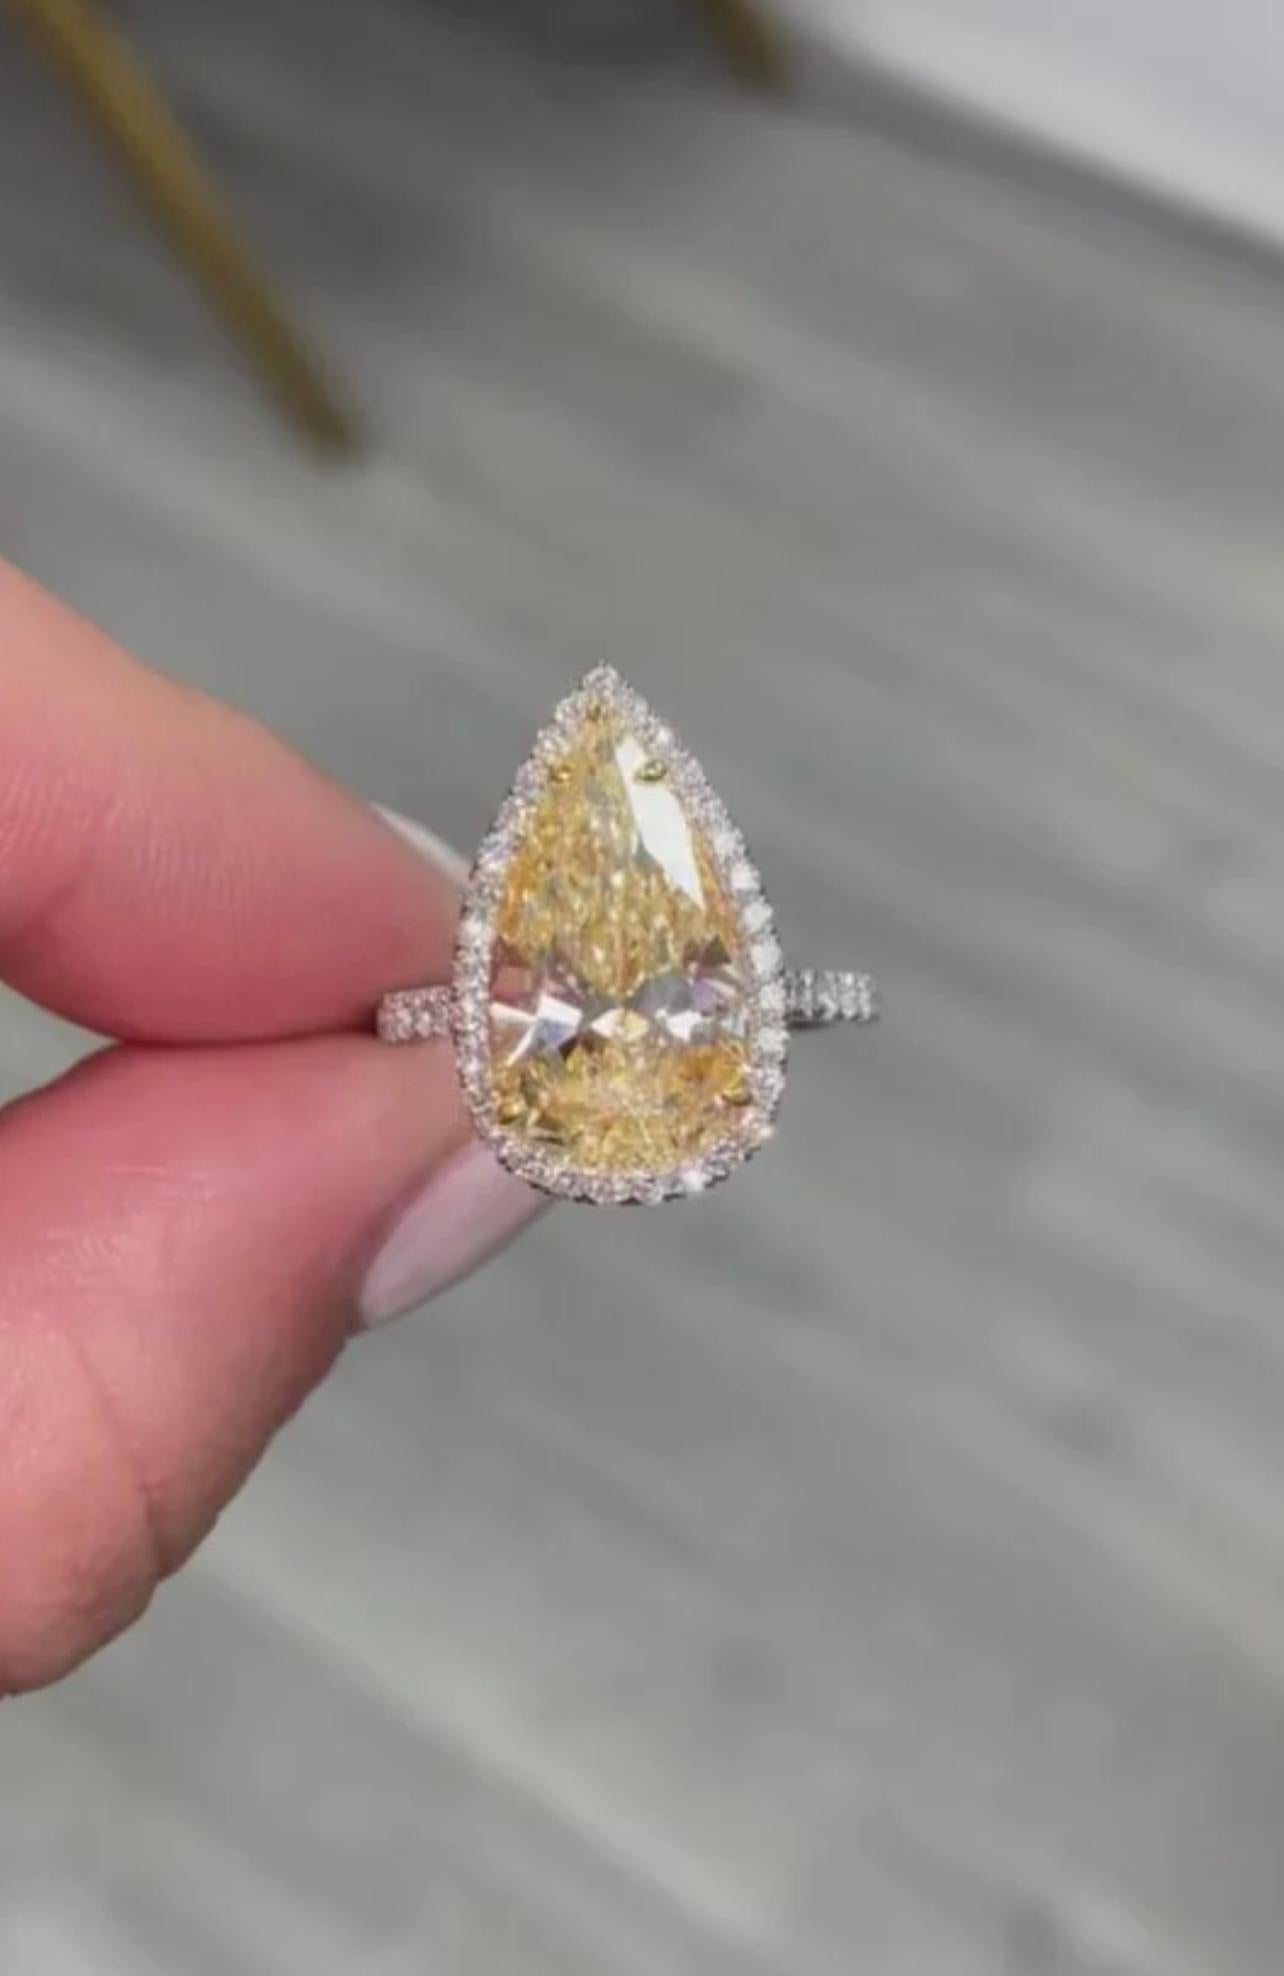 •4.49 Carat GIA Pear Shape, 
Light Yellow, W-X Color
•VS1 Clarity 
•Massive look! 16 millimeter length, on par with 6 and 7 carats pears!
•Handmade platinum ring with yellow gold and a white diamond halo 
This piece can be viewed before purchase in